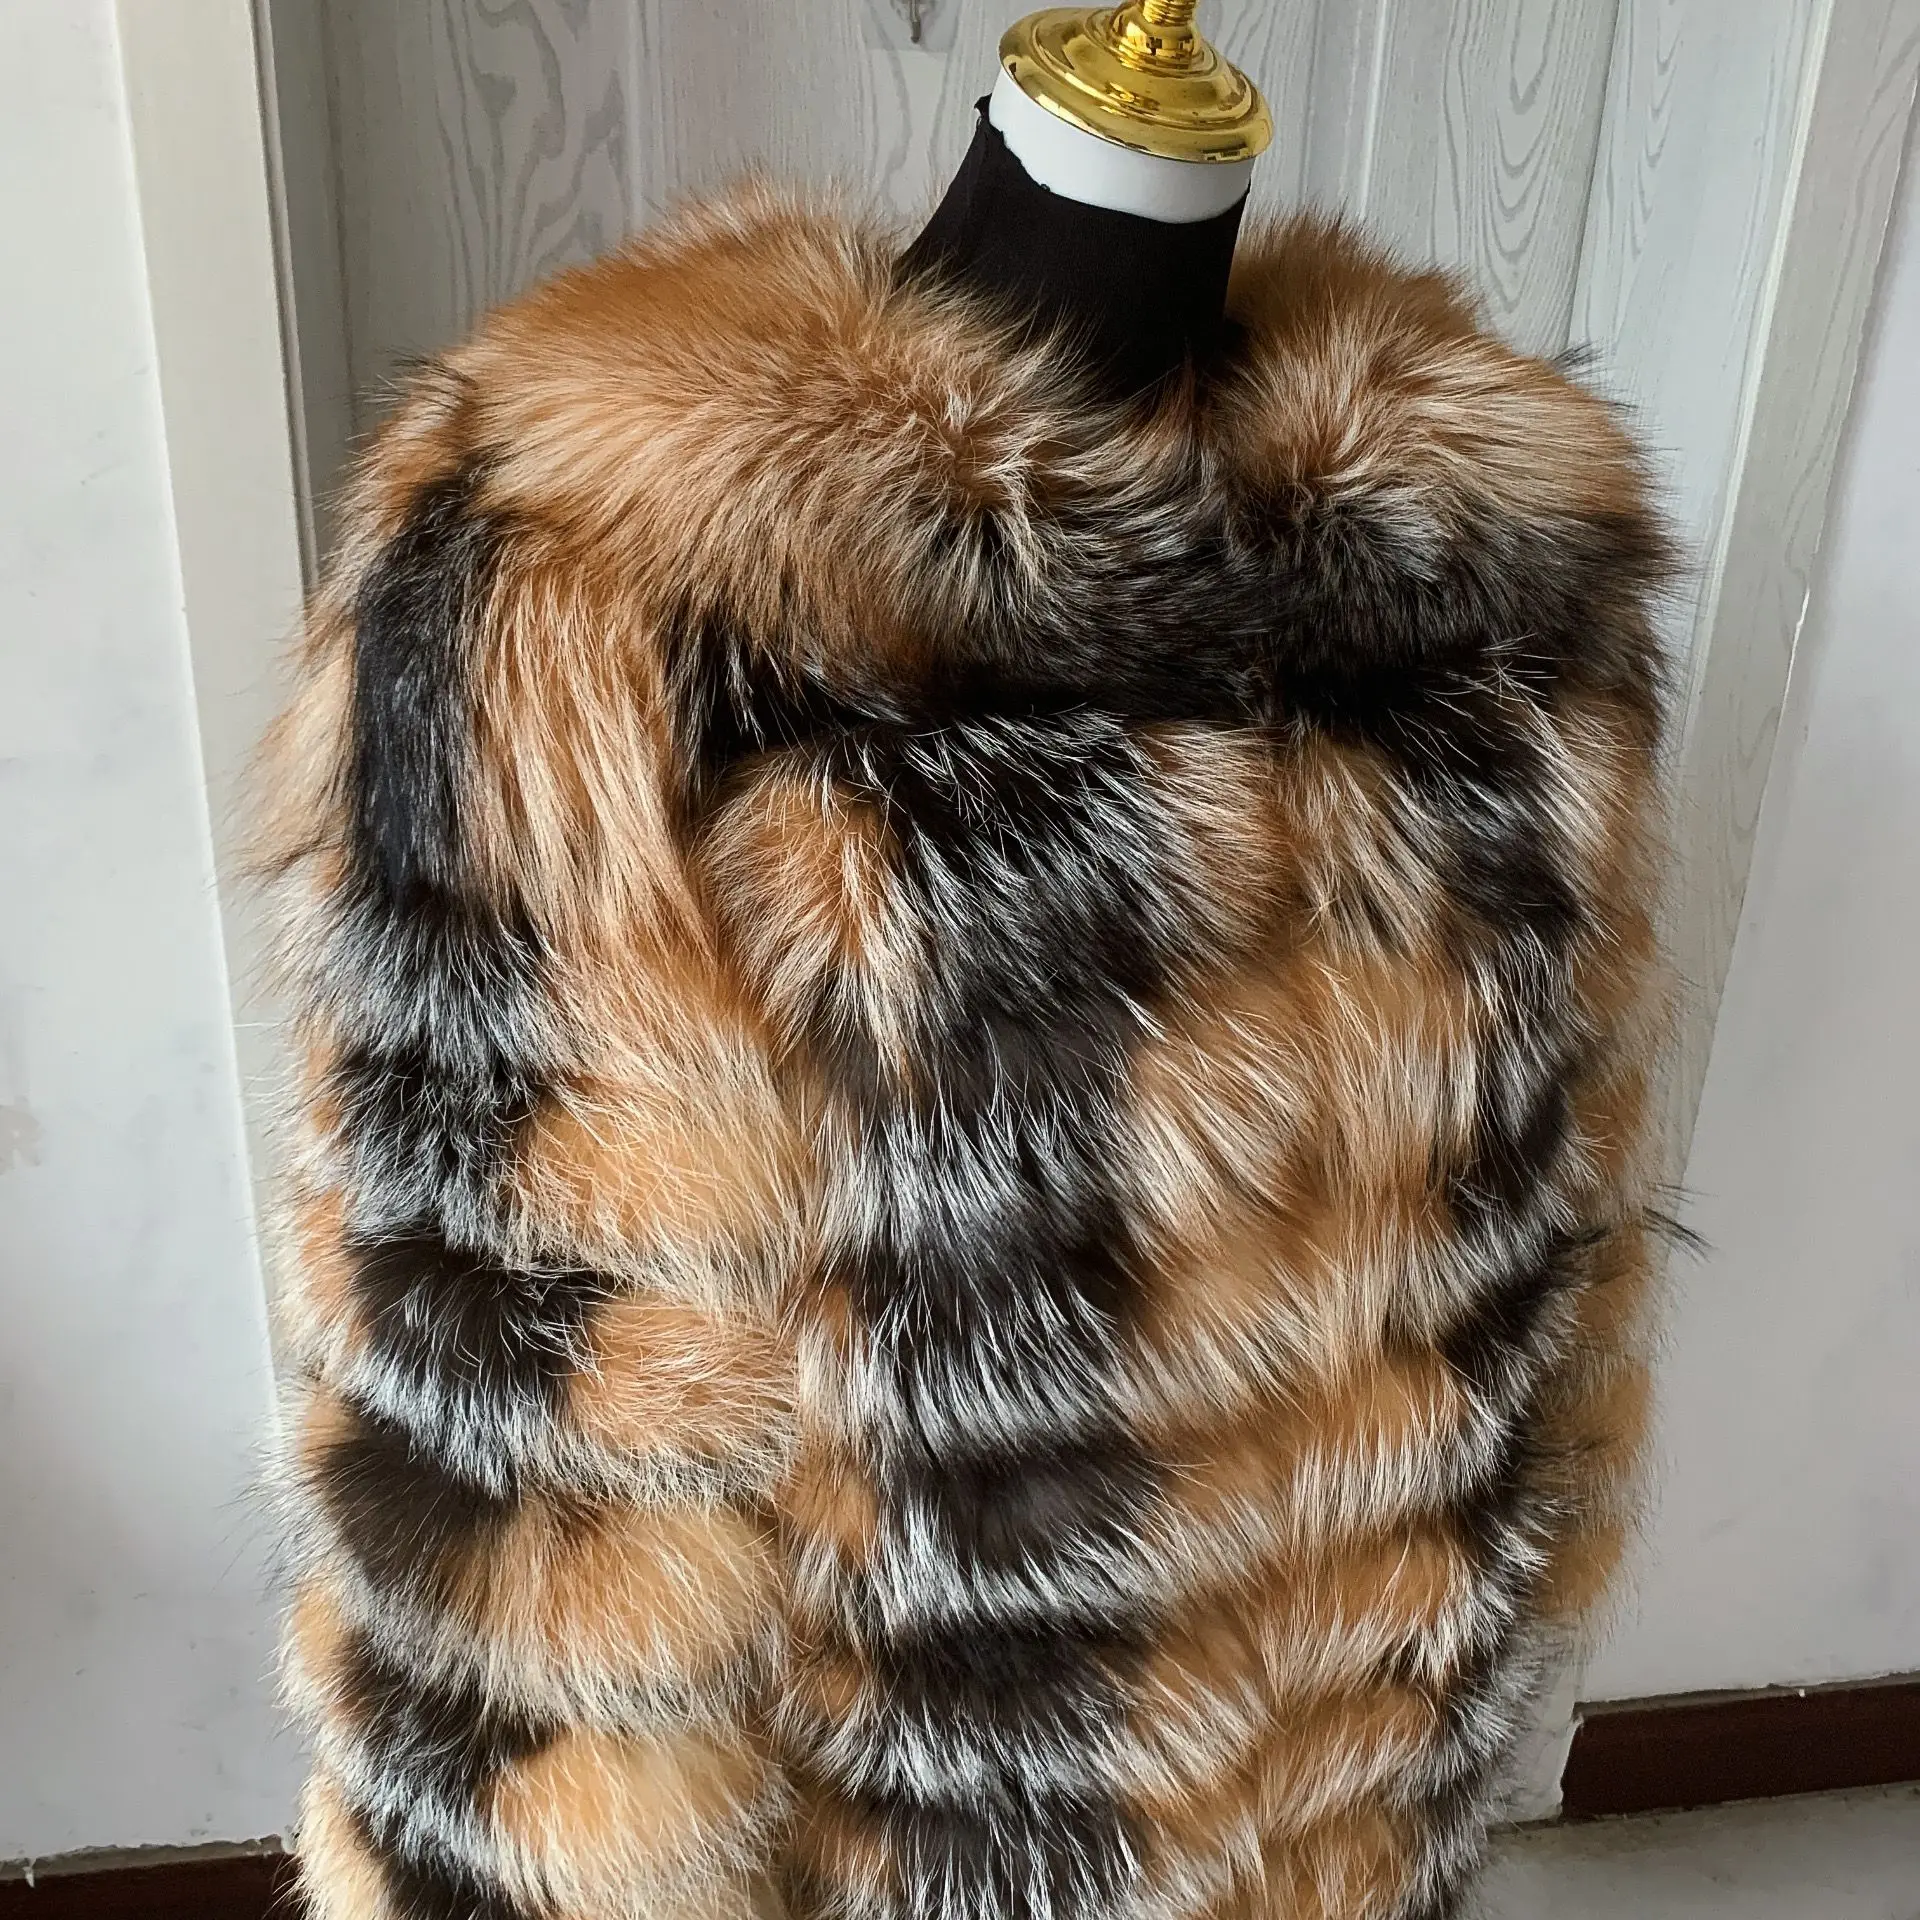 Women's winter warm real fur long coat noble quality golden fox coat natural real fox fur long luxury leather jacket enlarge